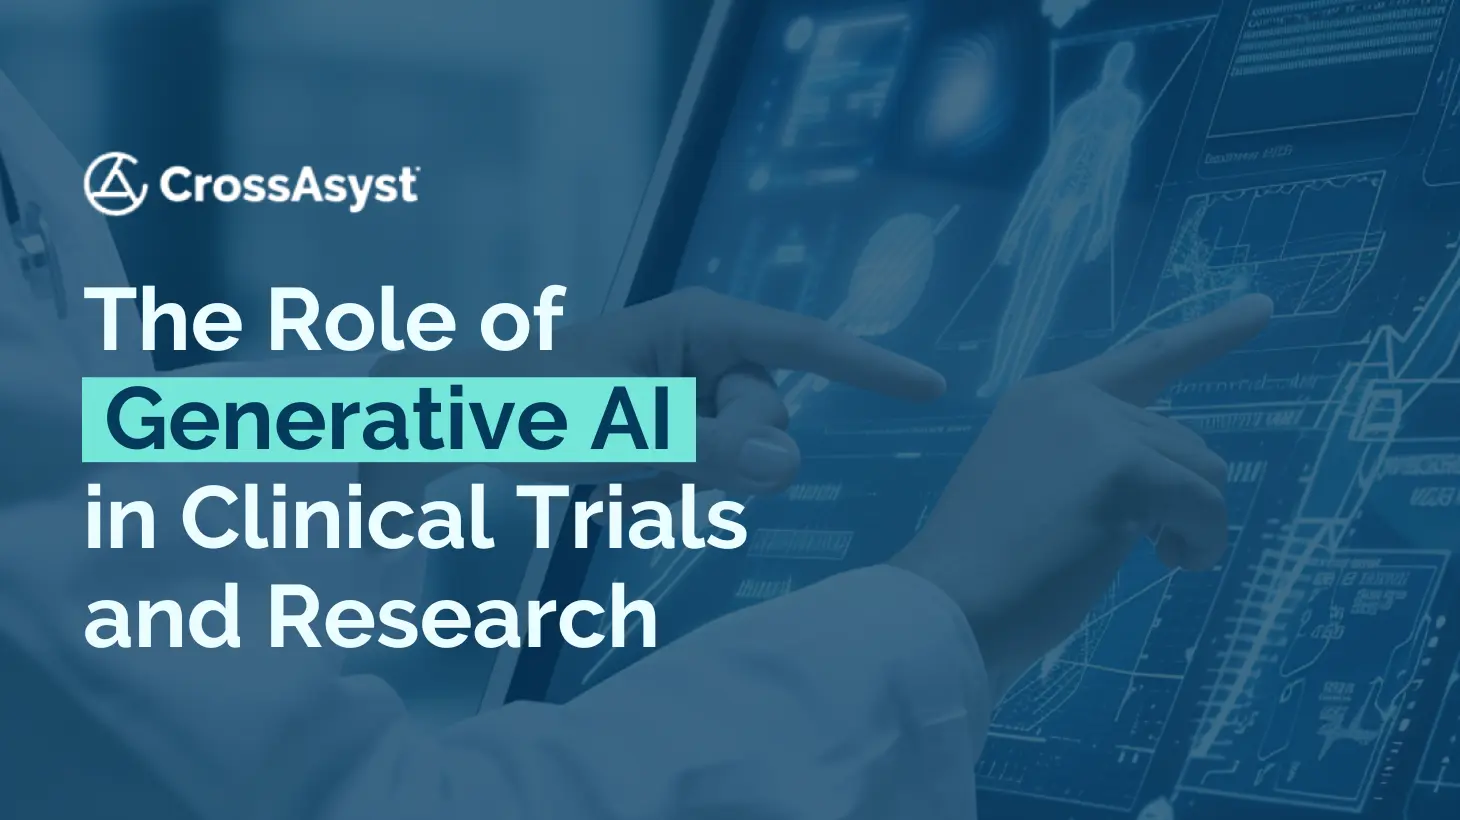 The Role of Generative AI in Clinical Trials and Research